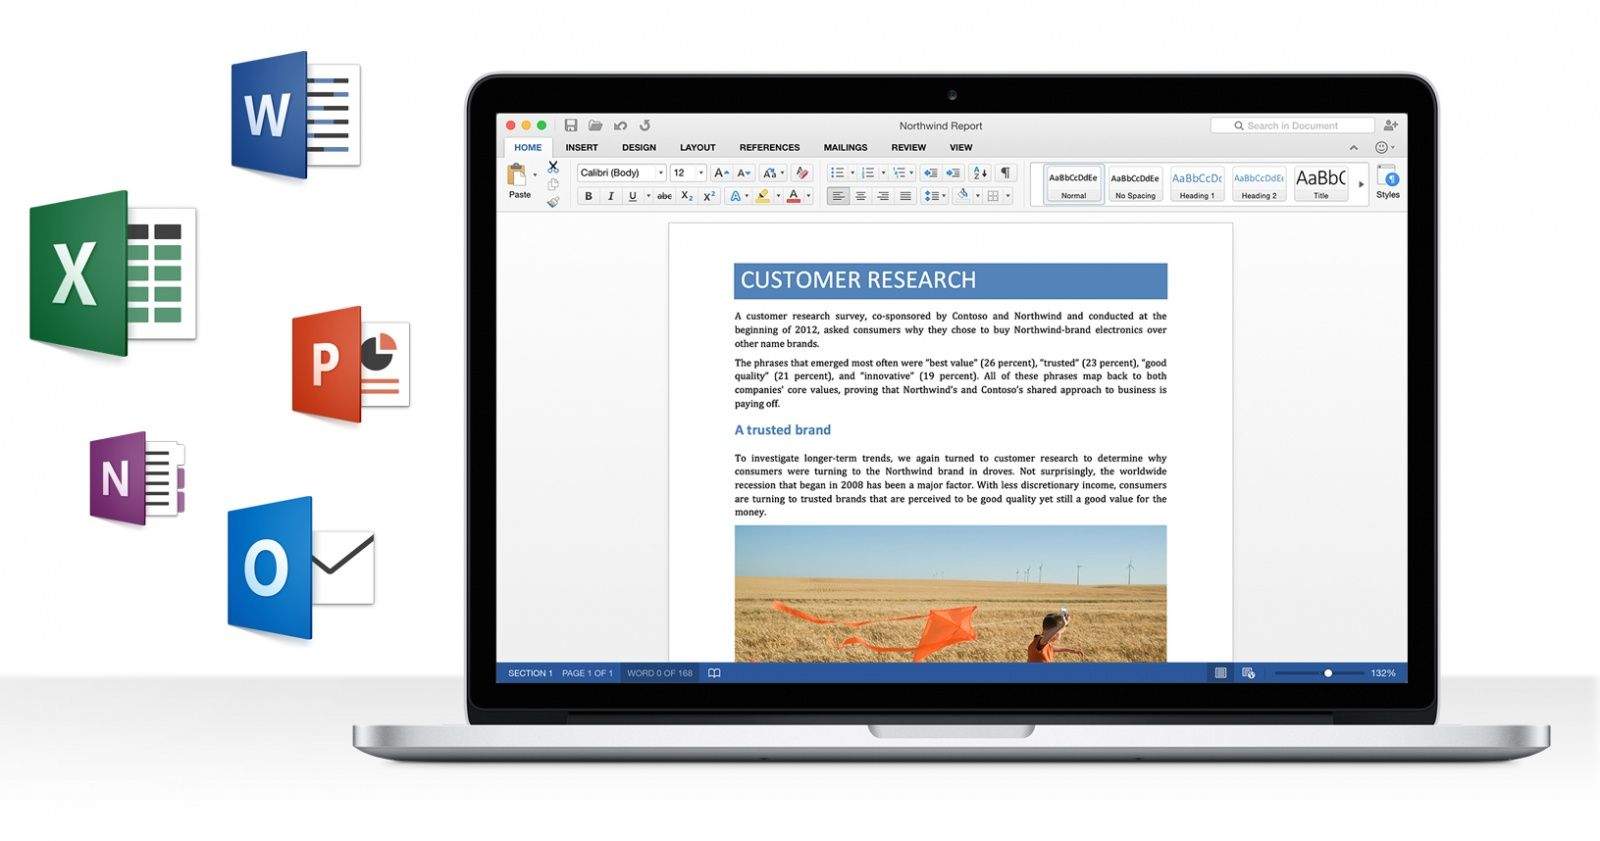 is there a new microsoft office for mac coming out